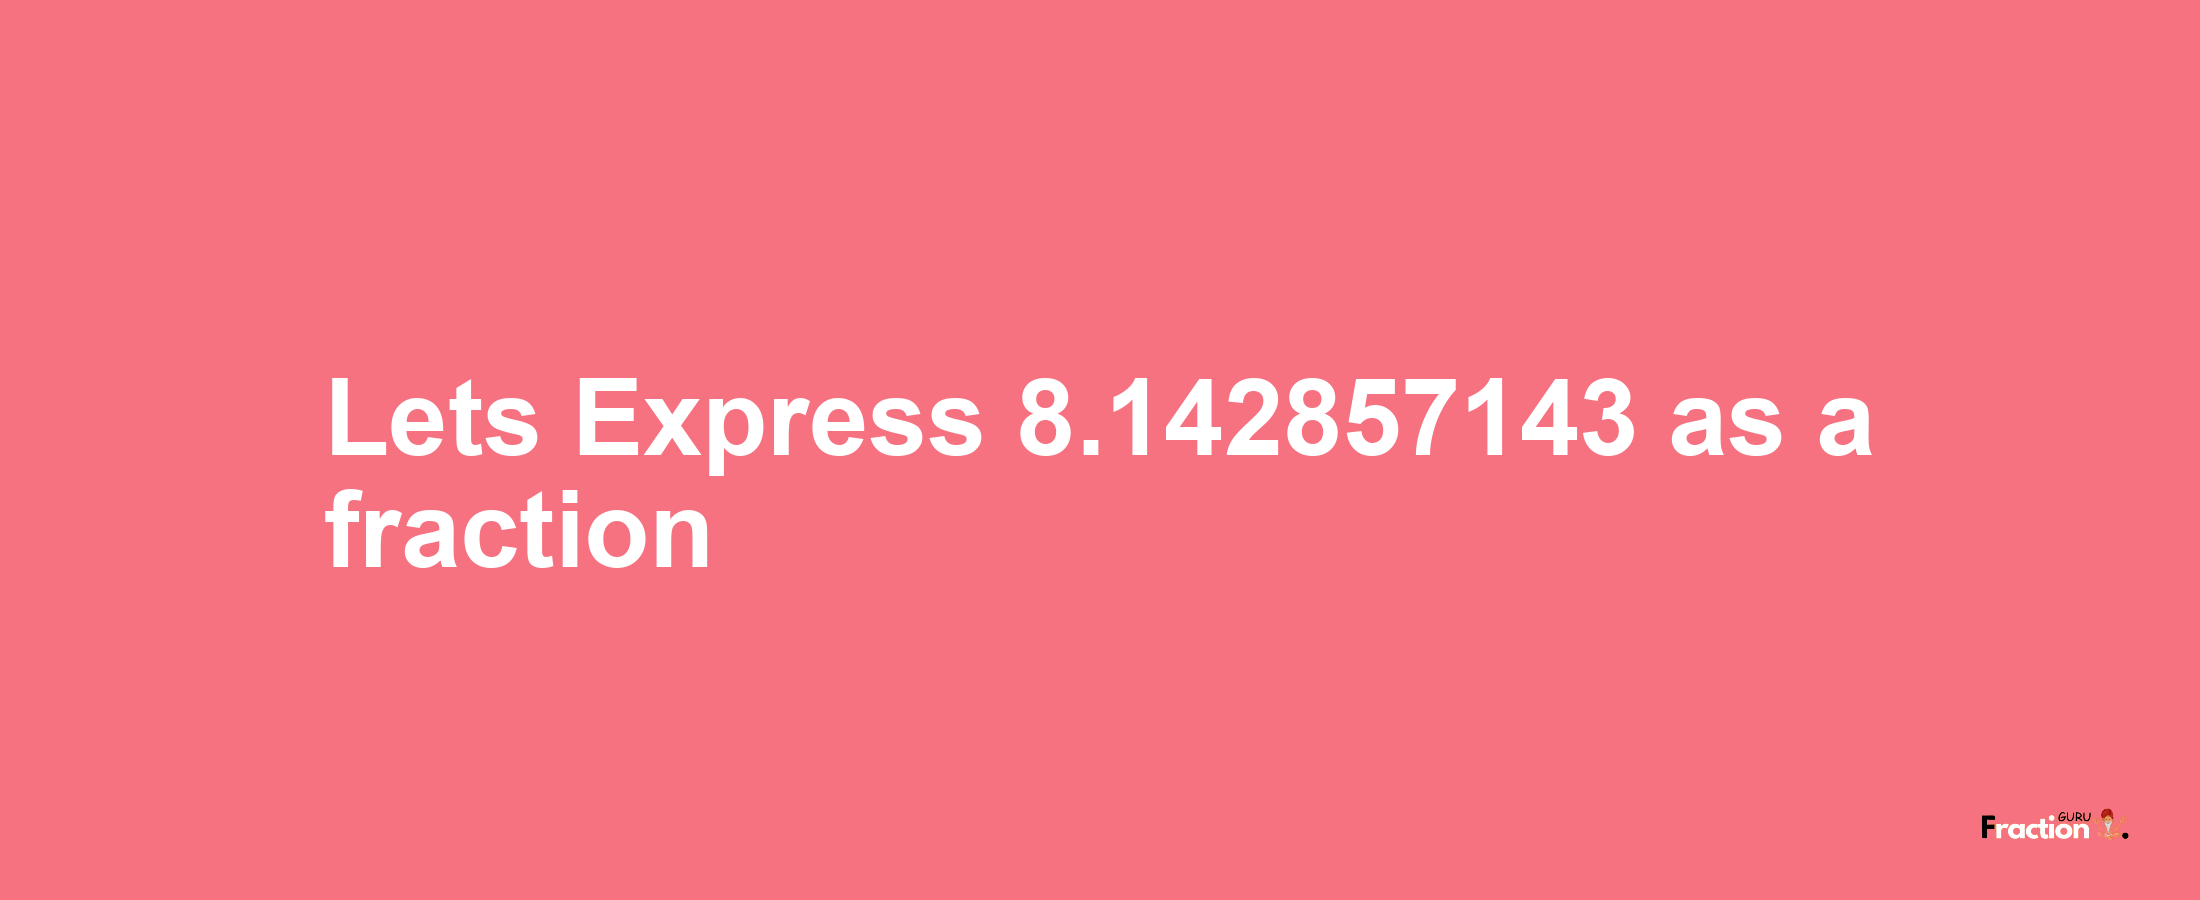 Lets Express 8.142857143 as afraction